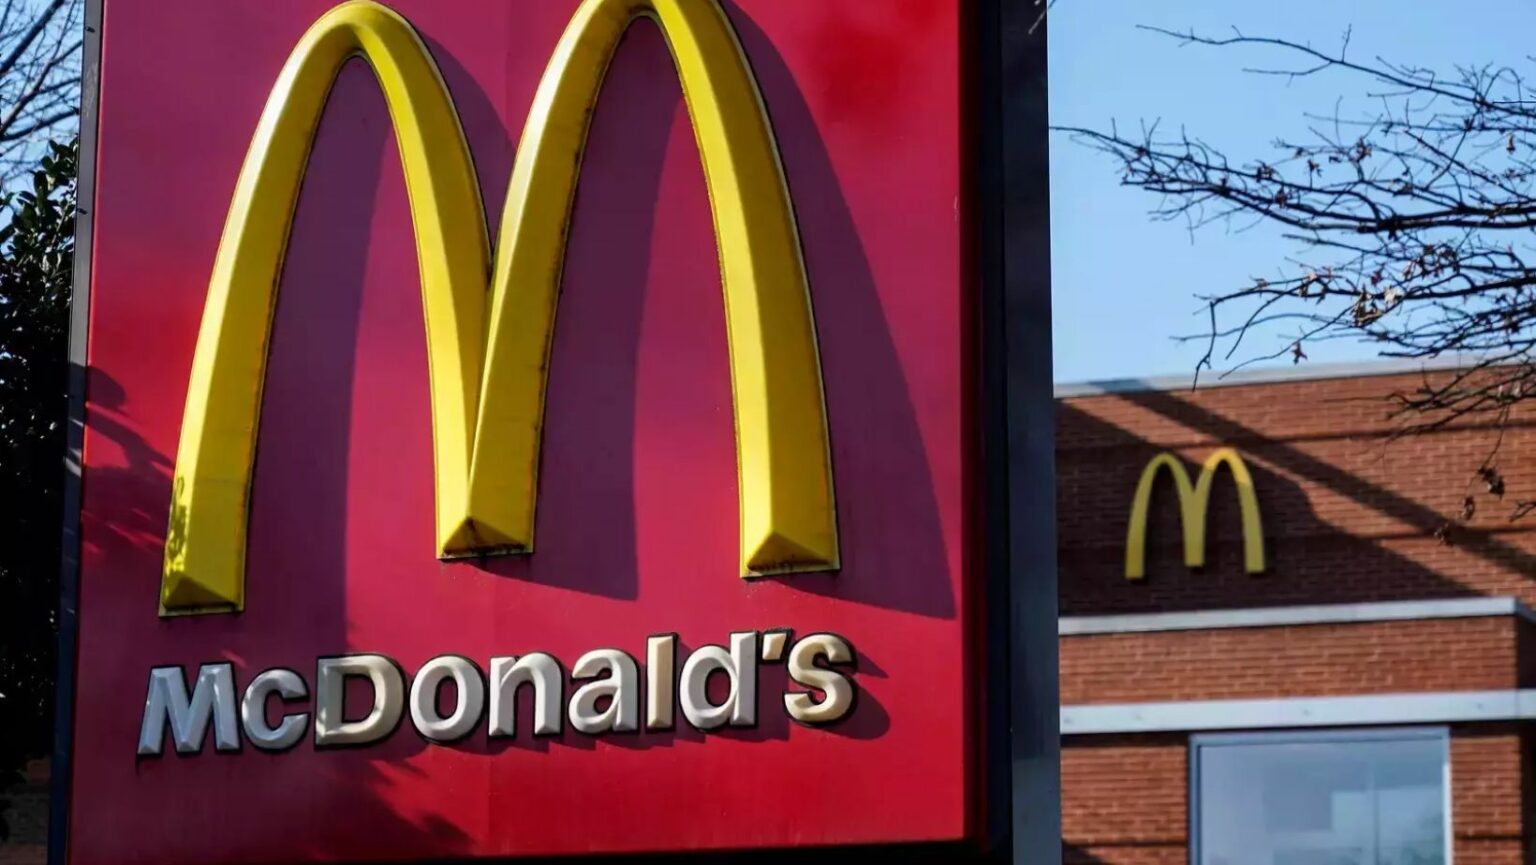 McDonald's Indonesia Expands into Wedding Catering